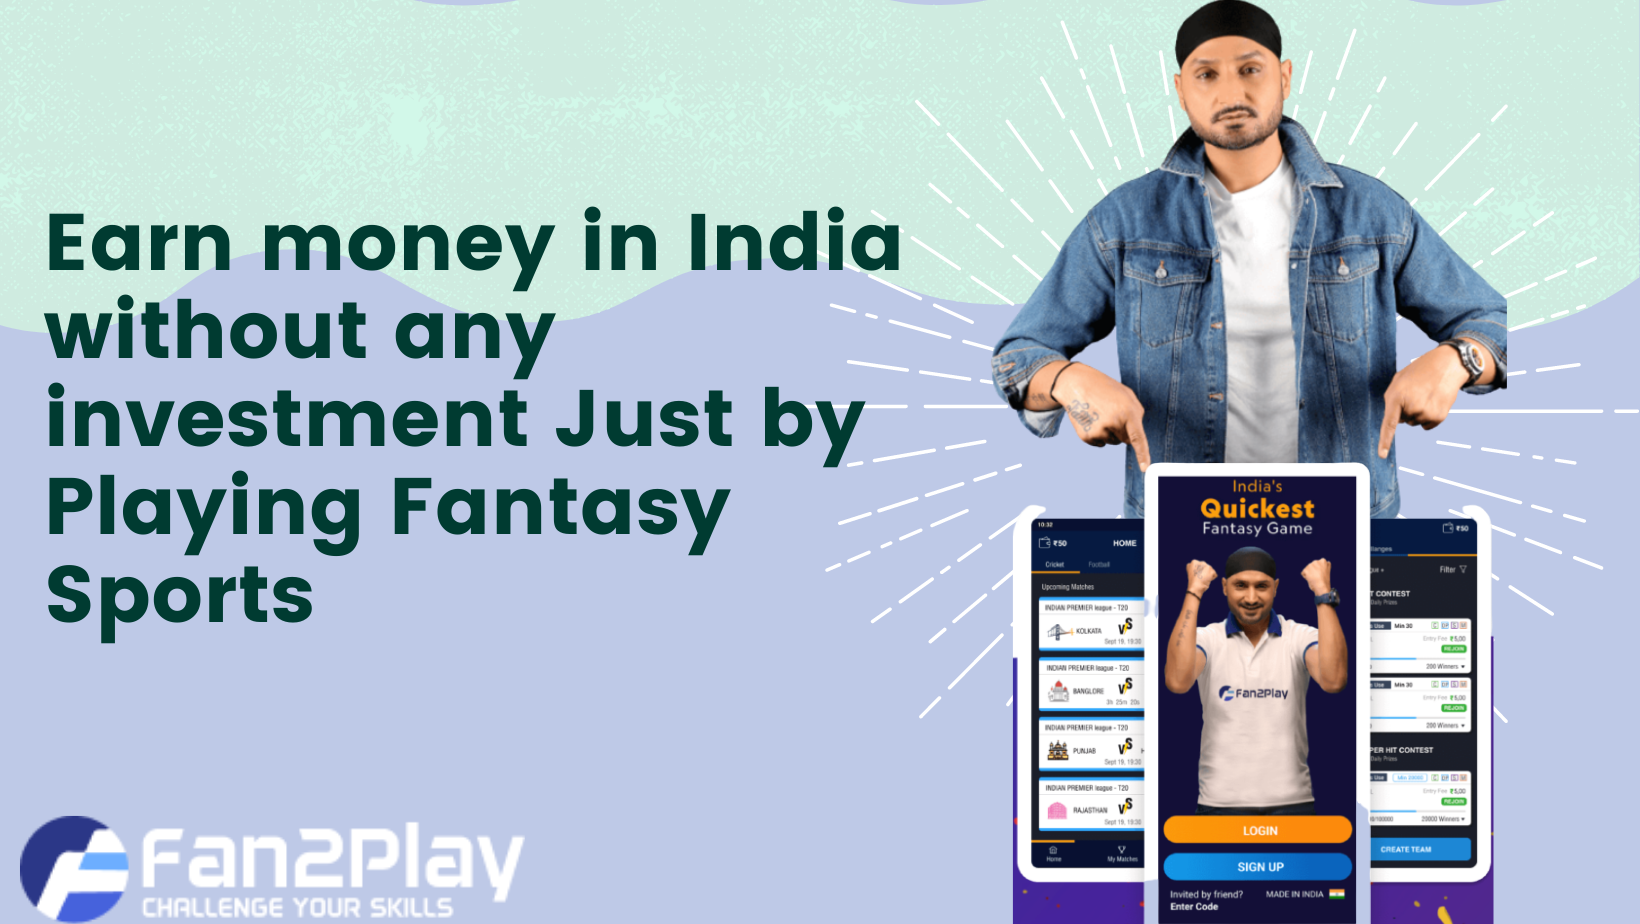 How to earn money in India without any investment just by playing